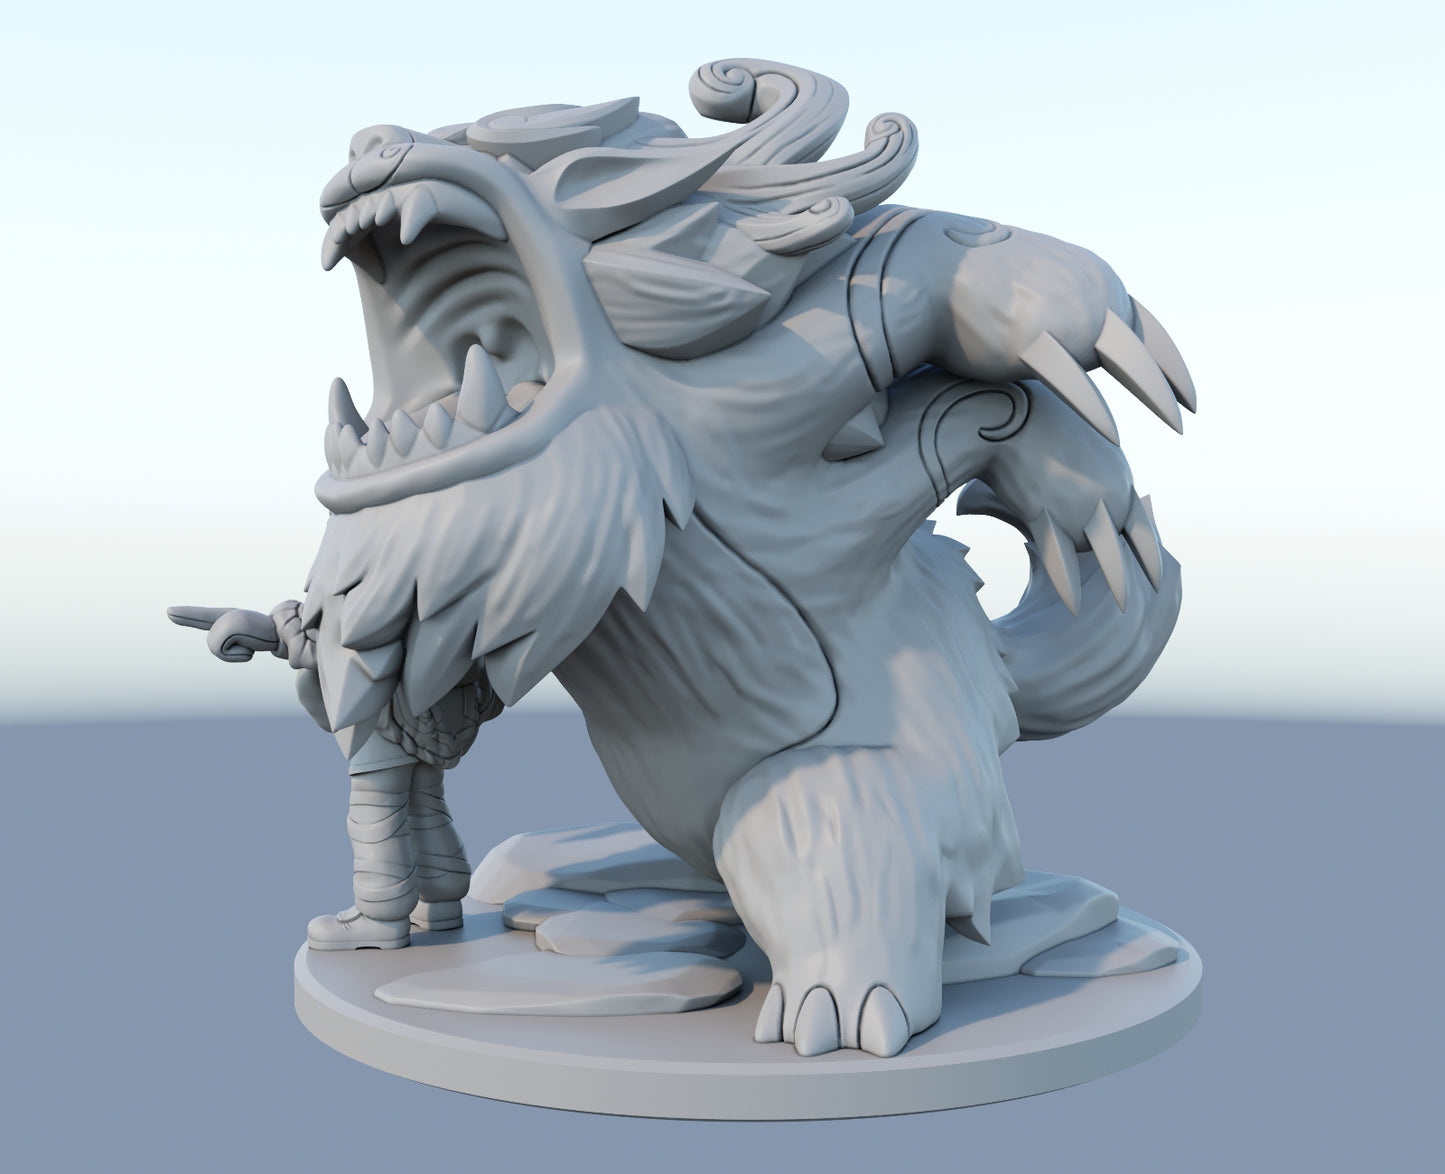 Nunu and Willump 3D-printed League of Legends champion figure. Decorate your gaming setup or home with your favorite League of Legends champion! Choose between the unpainted version, perfect for you to paint yourself, or the hand-painted version by a professional painter. Order your figure today!